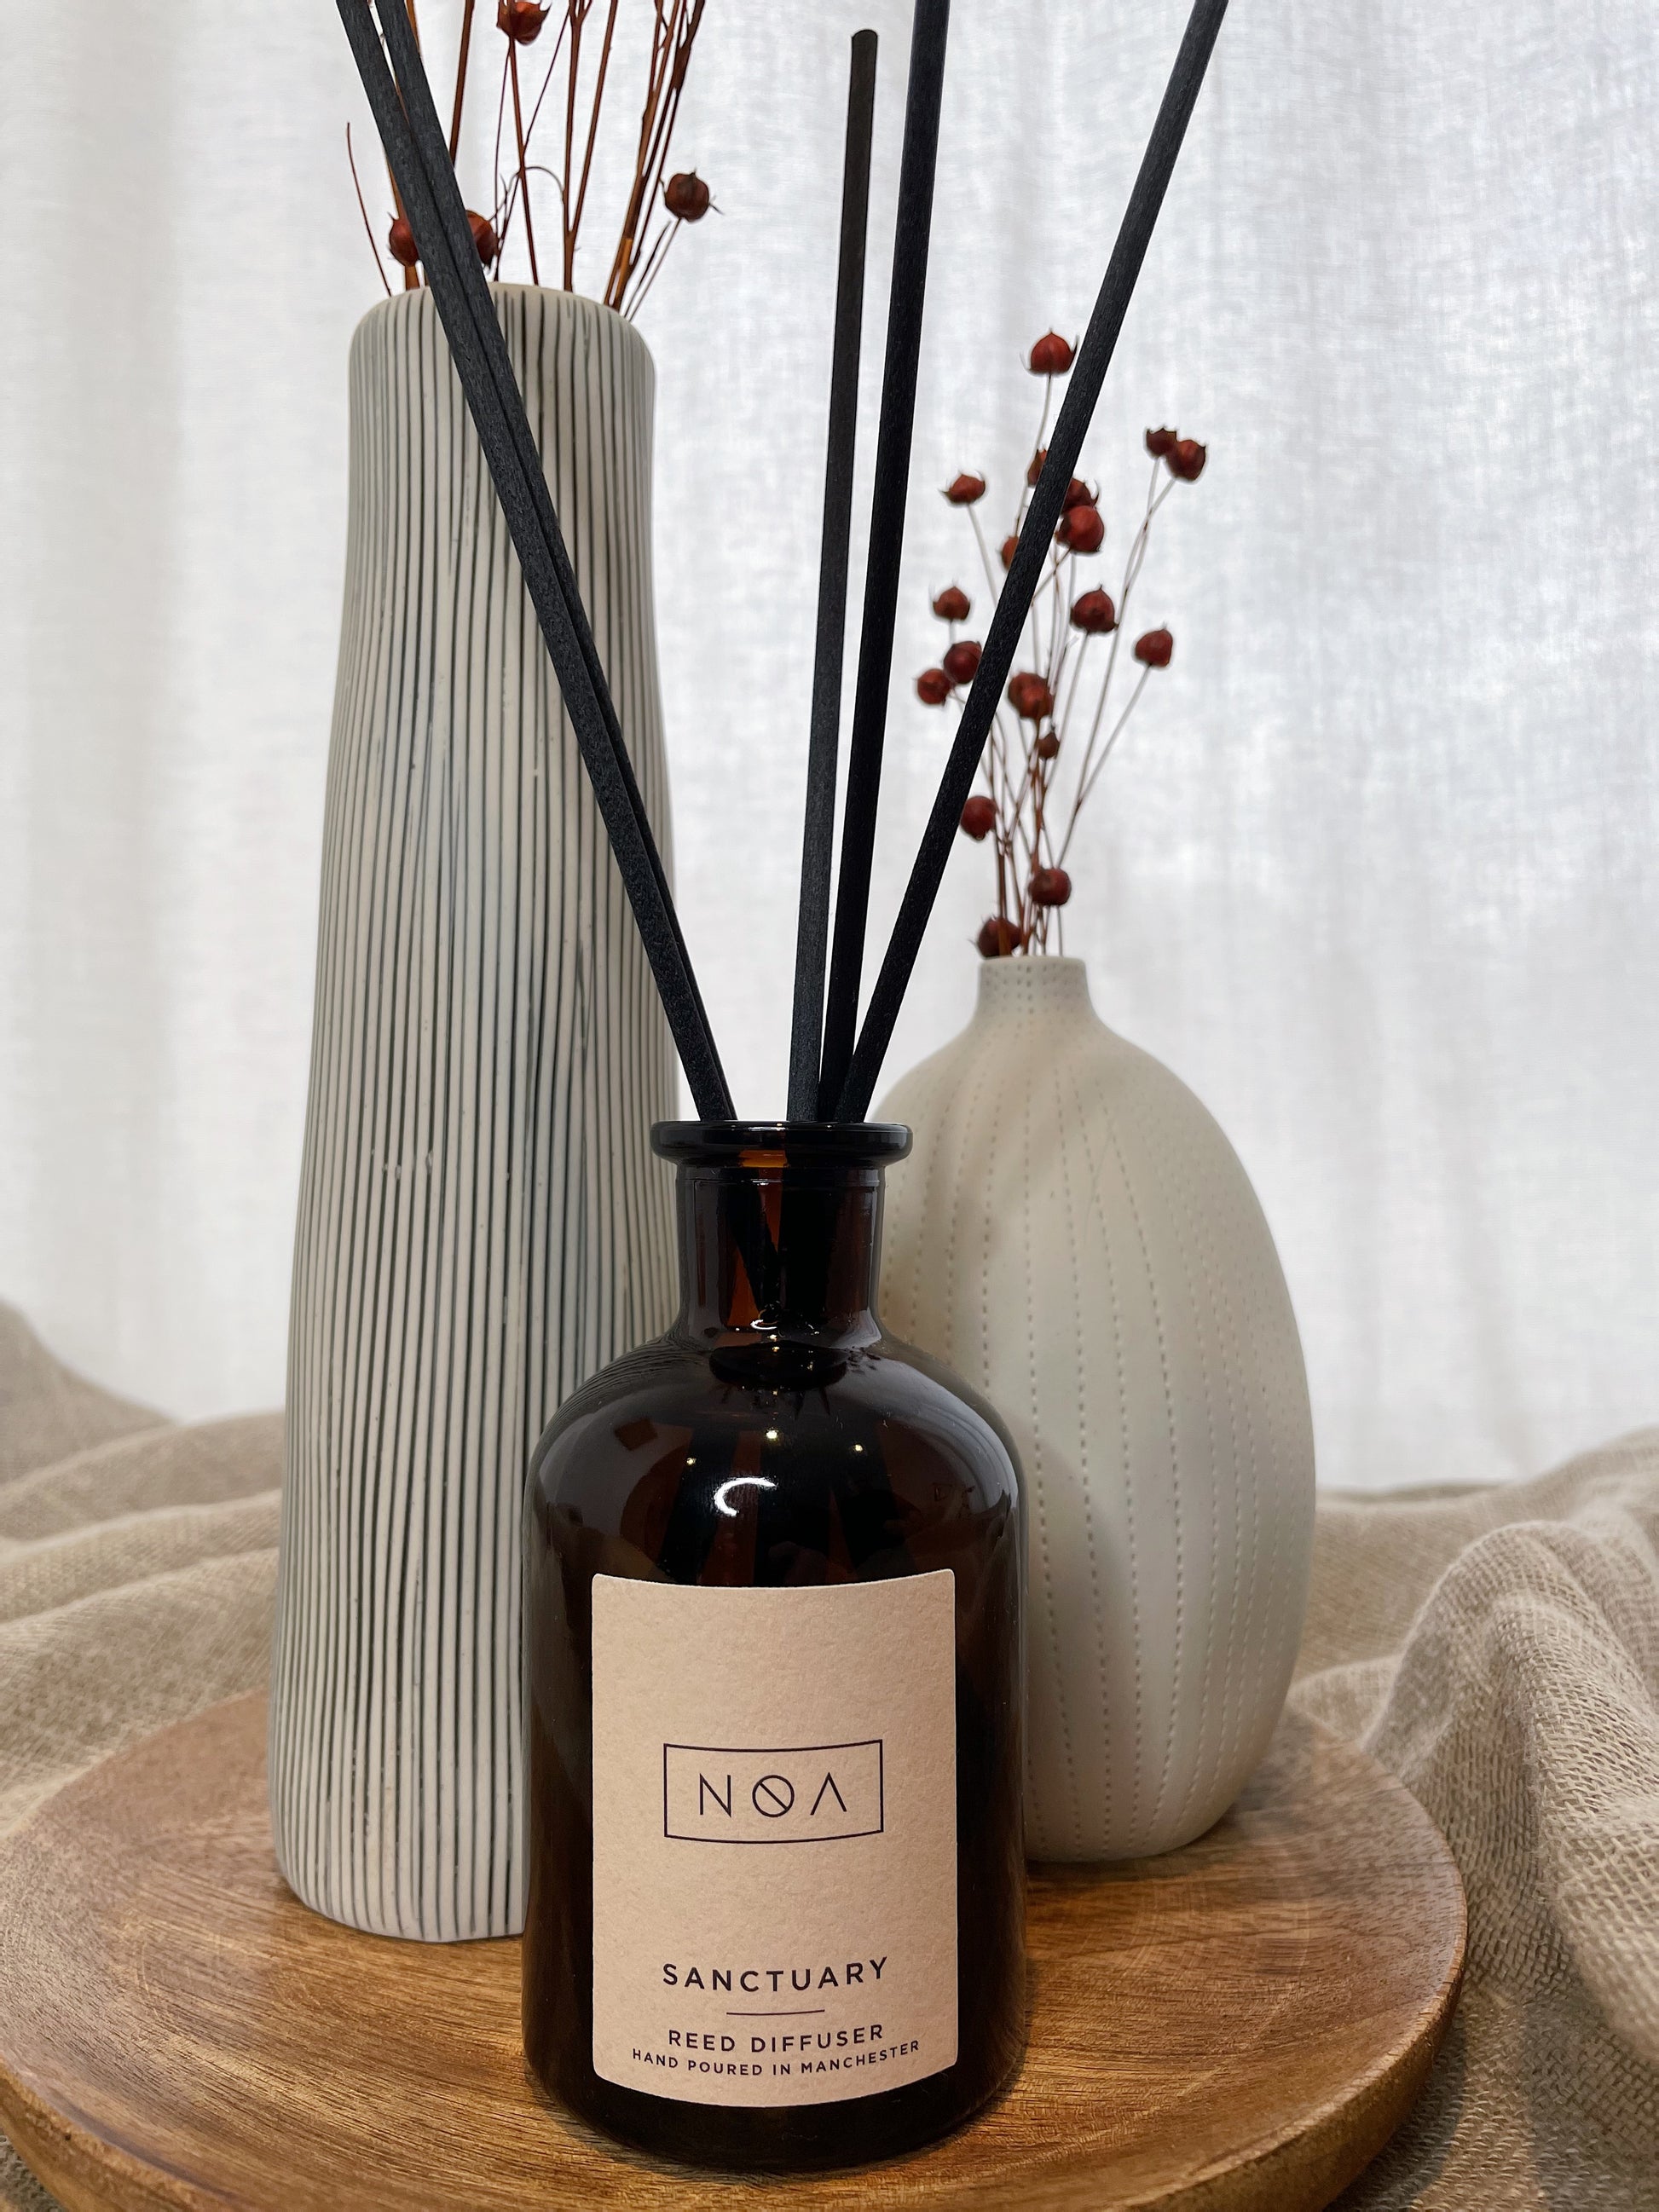 A brown glass diffuser, flanked by two vases - one black and white stripes, one white - on top of a wooden plate